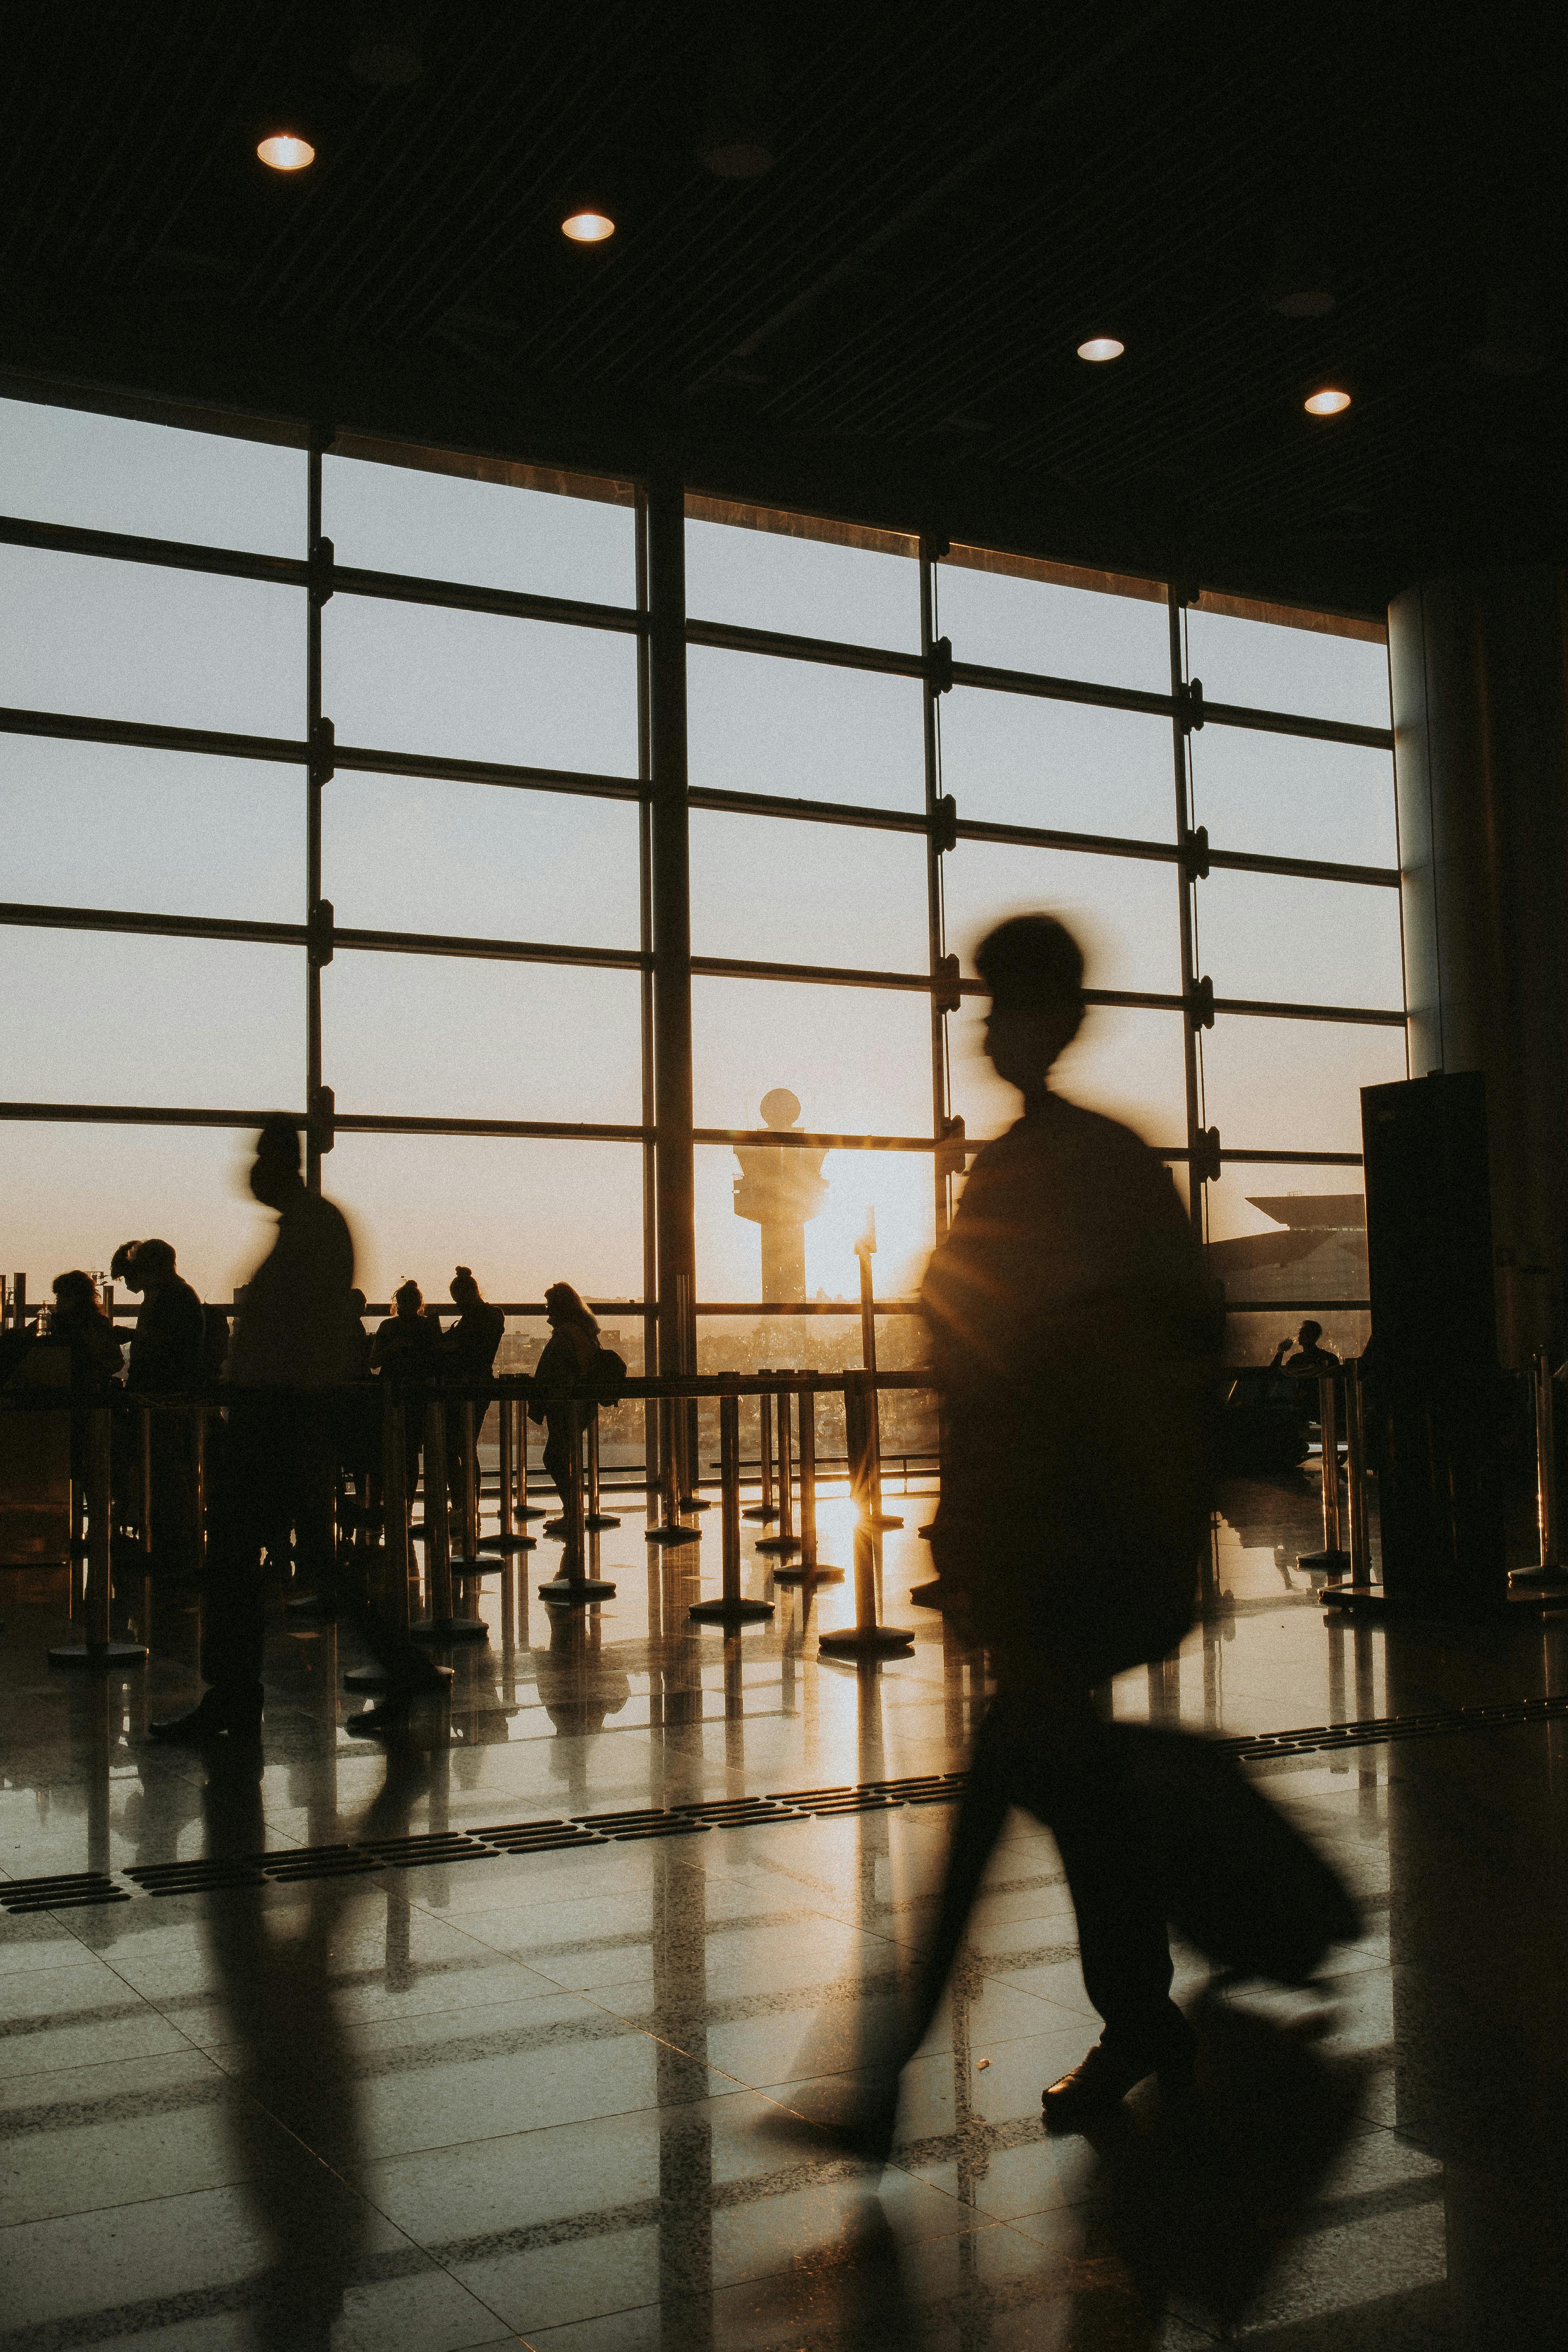 Airport Layover Strategies: How to Make the Most of Your Time